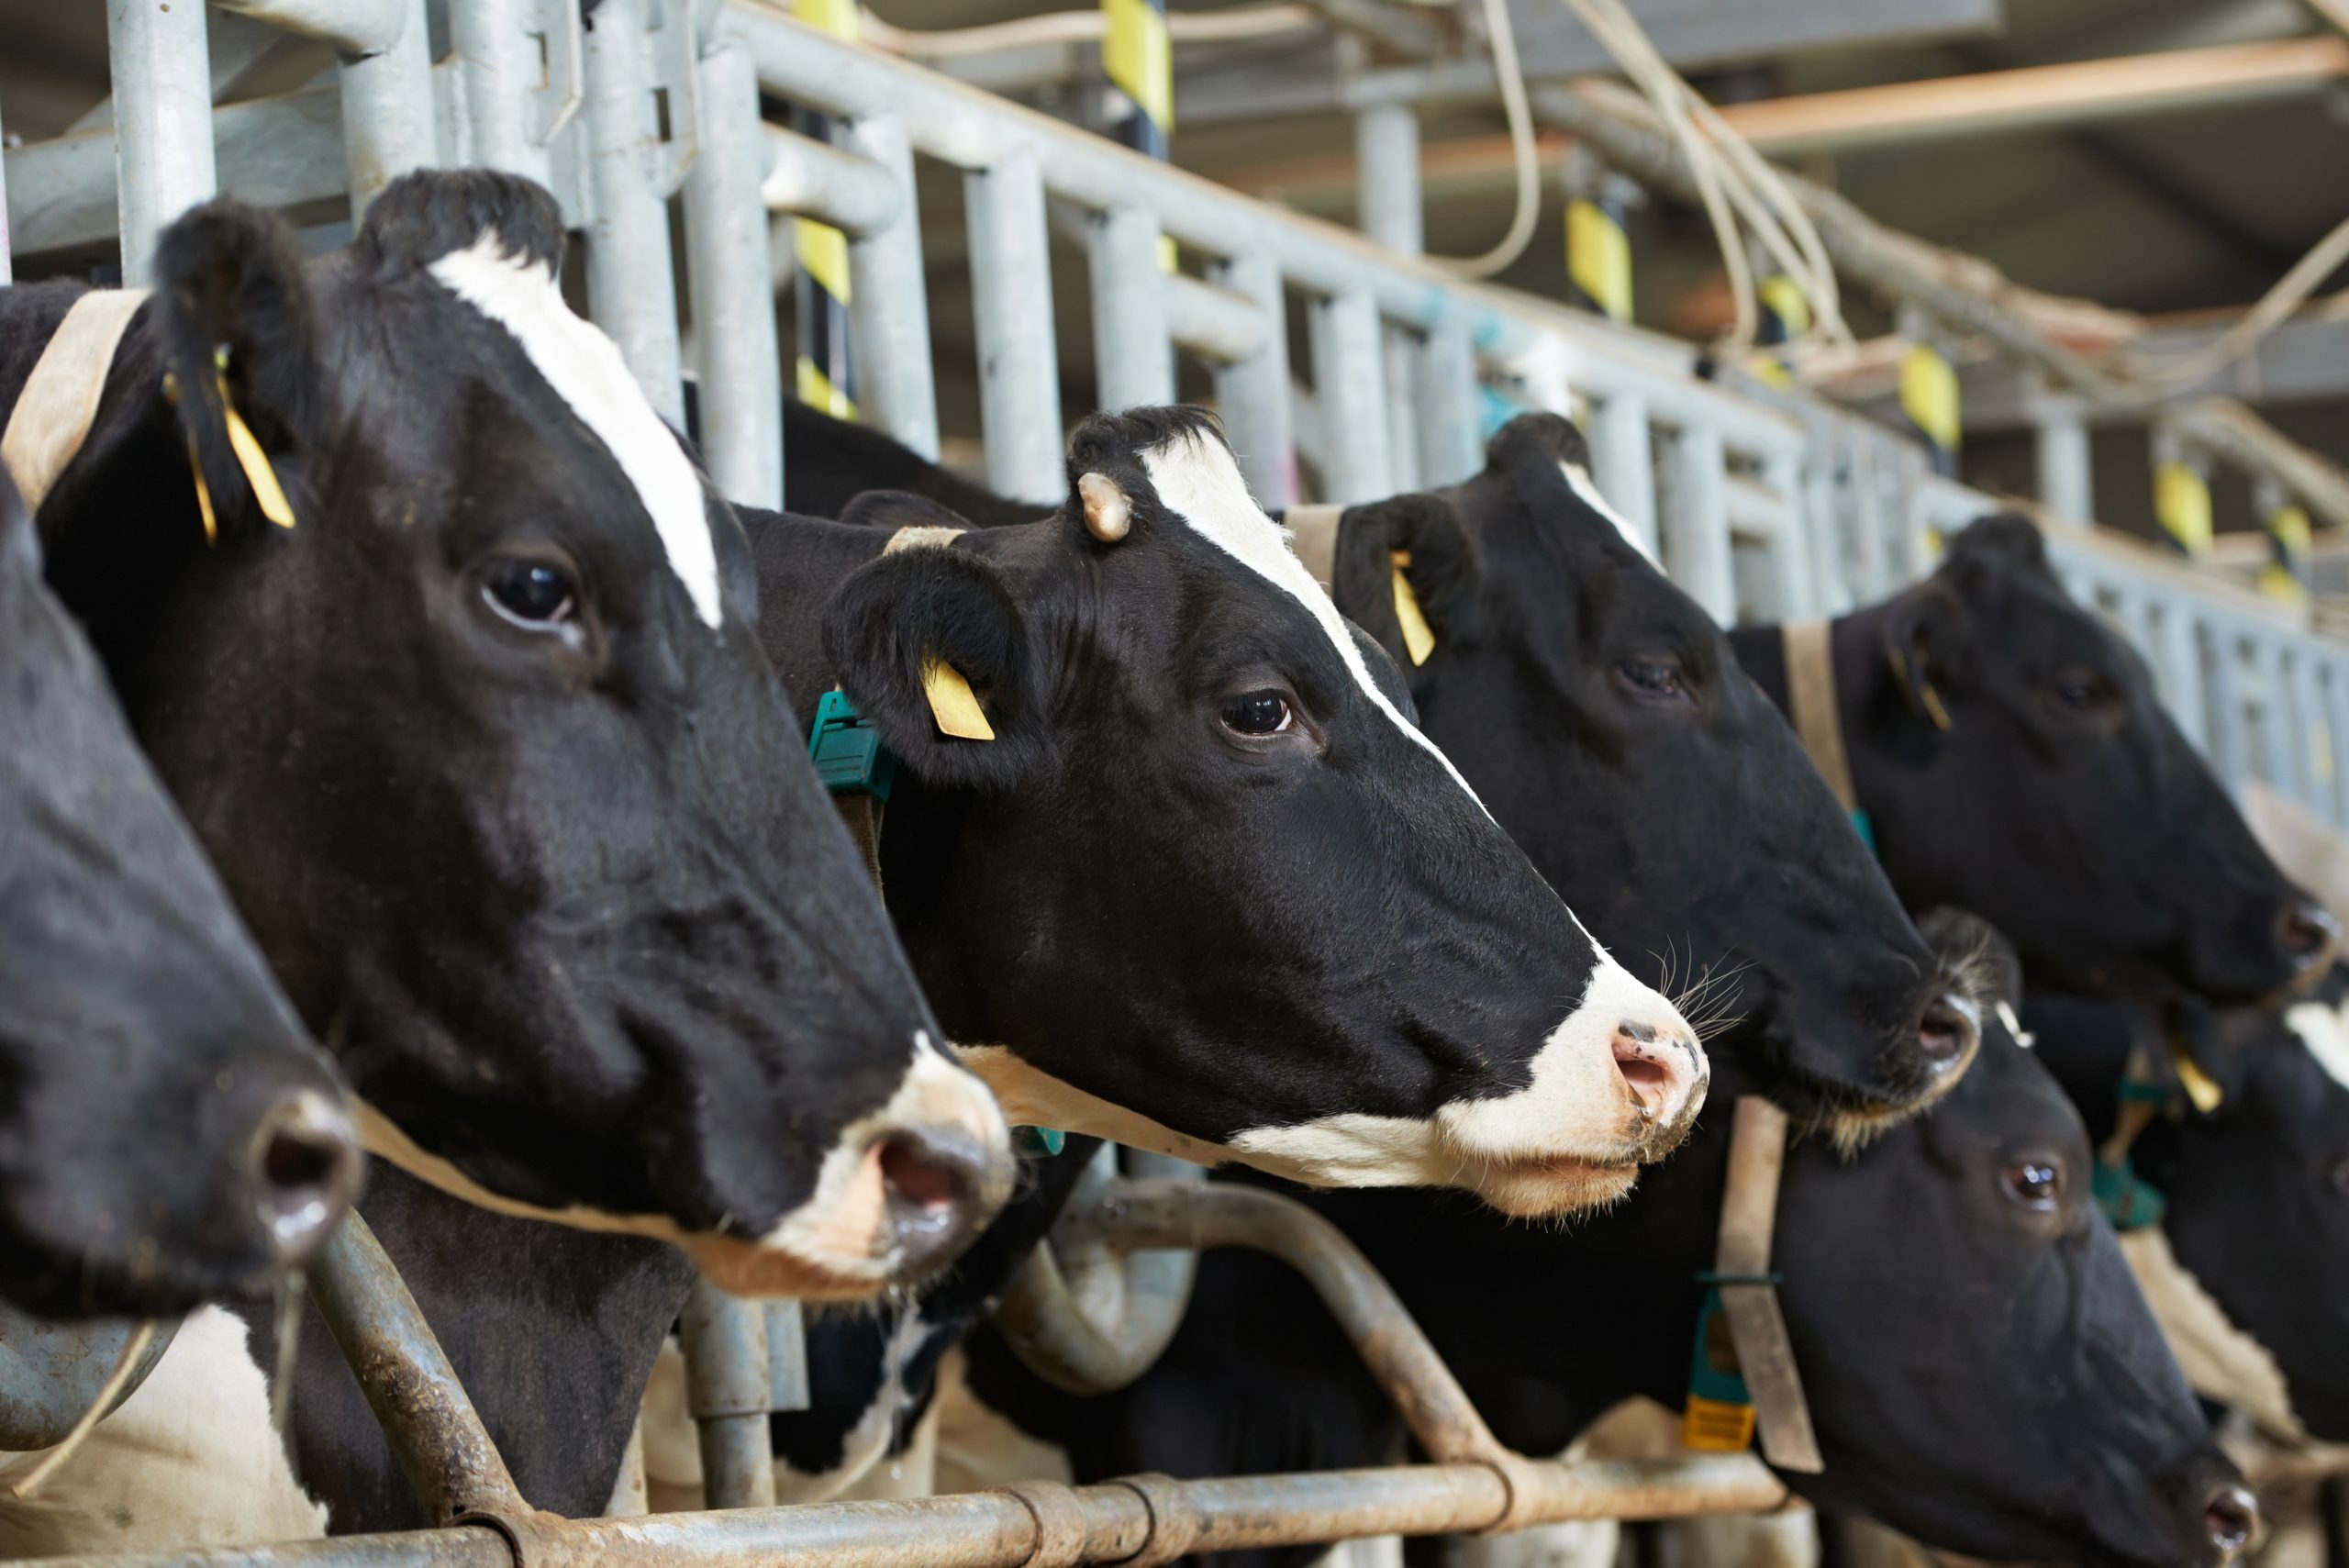 Ground Flaxseed supplementation in Dairy Cow diets